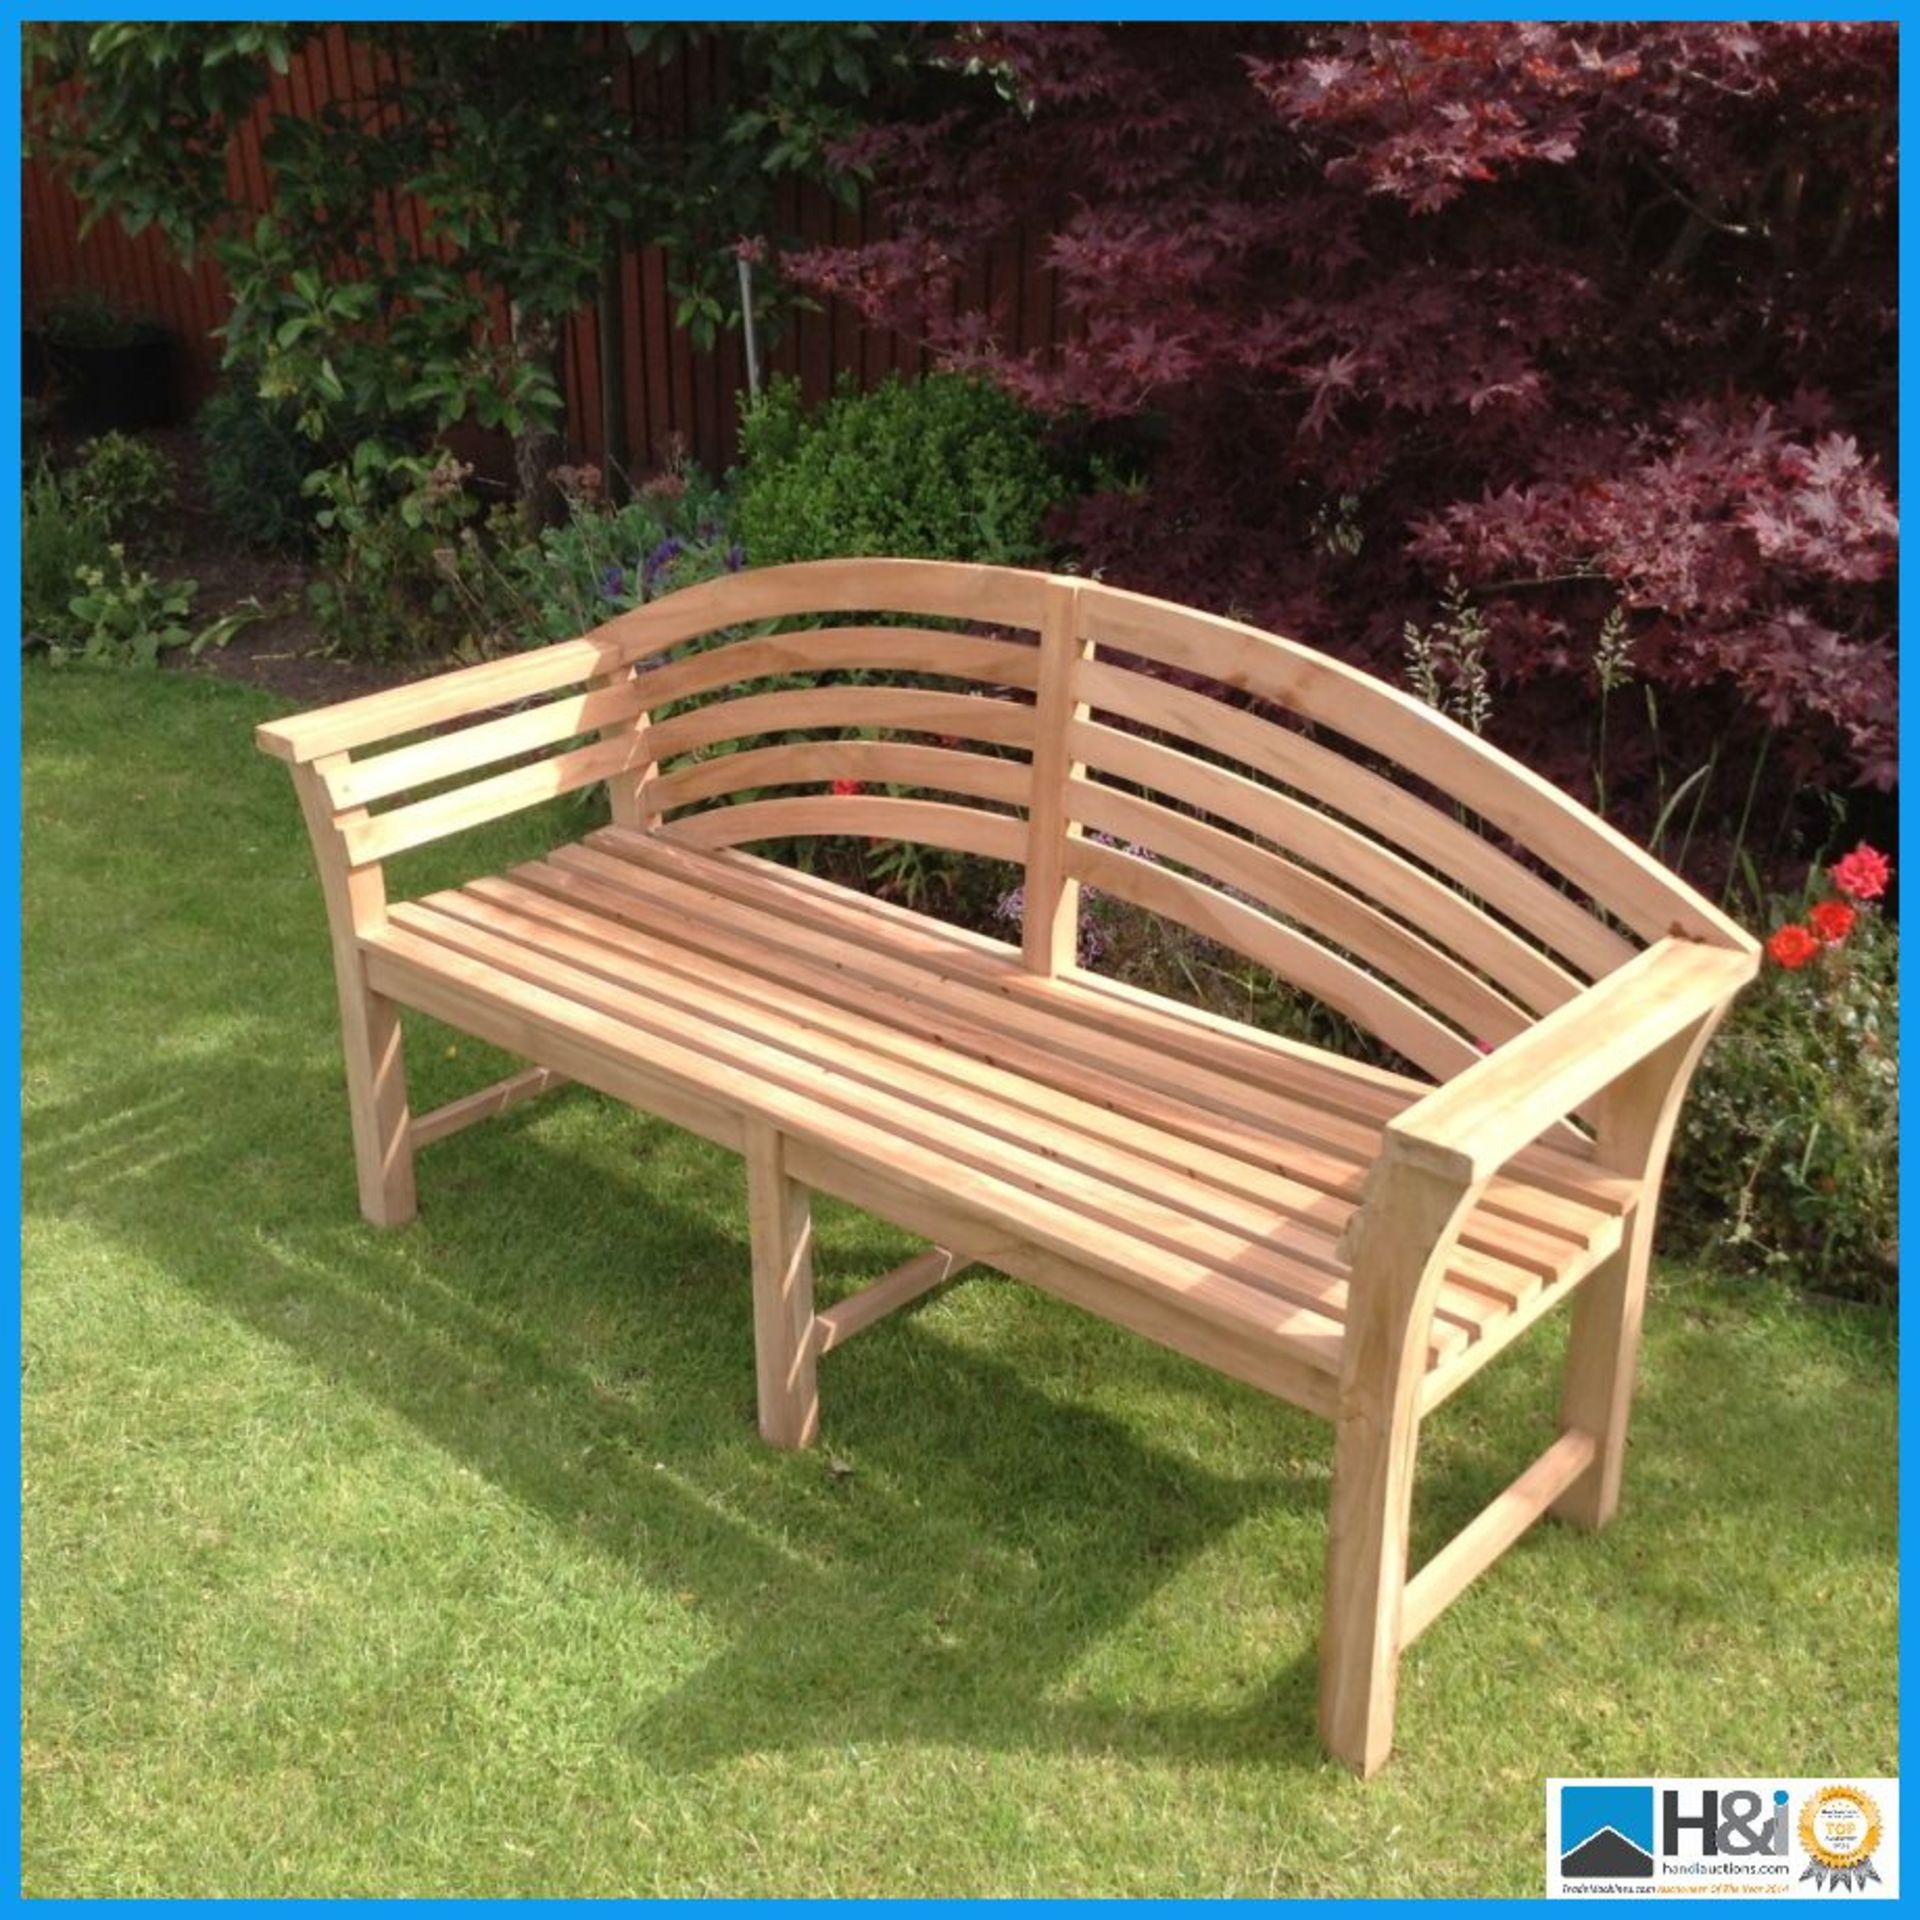 Teak Princess Bench This solid teak bench will give a beautiful and elegant look to any Garden A